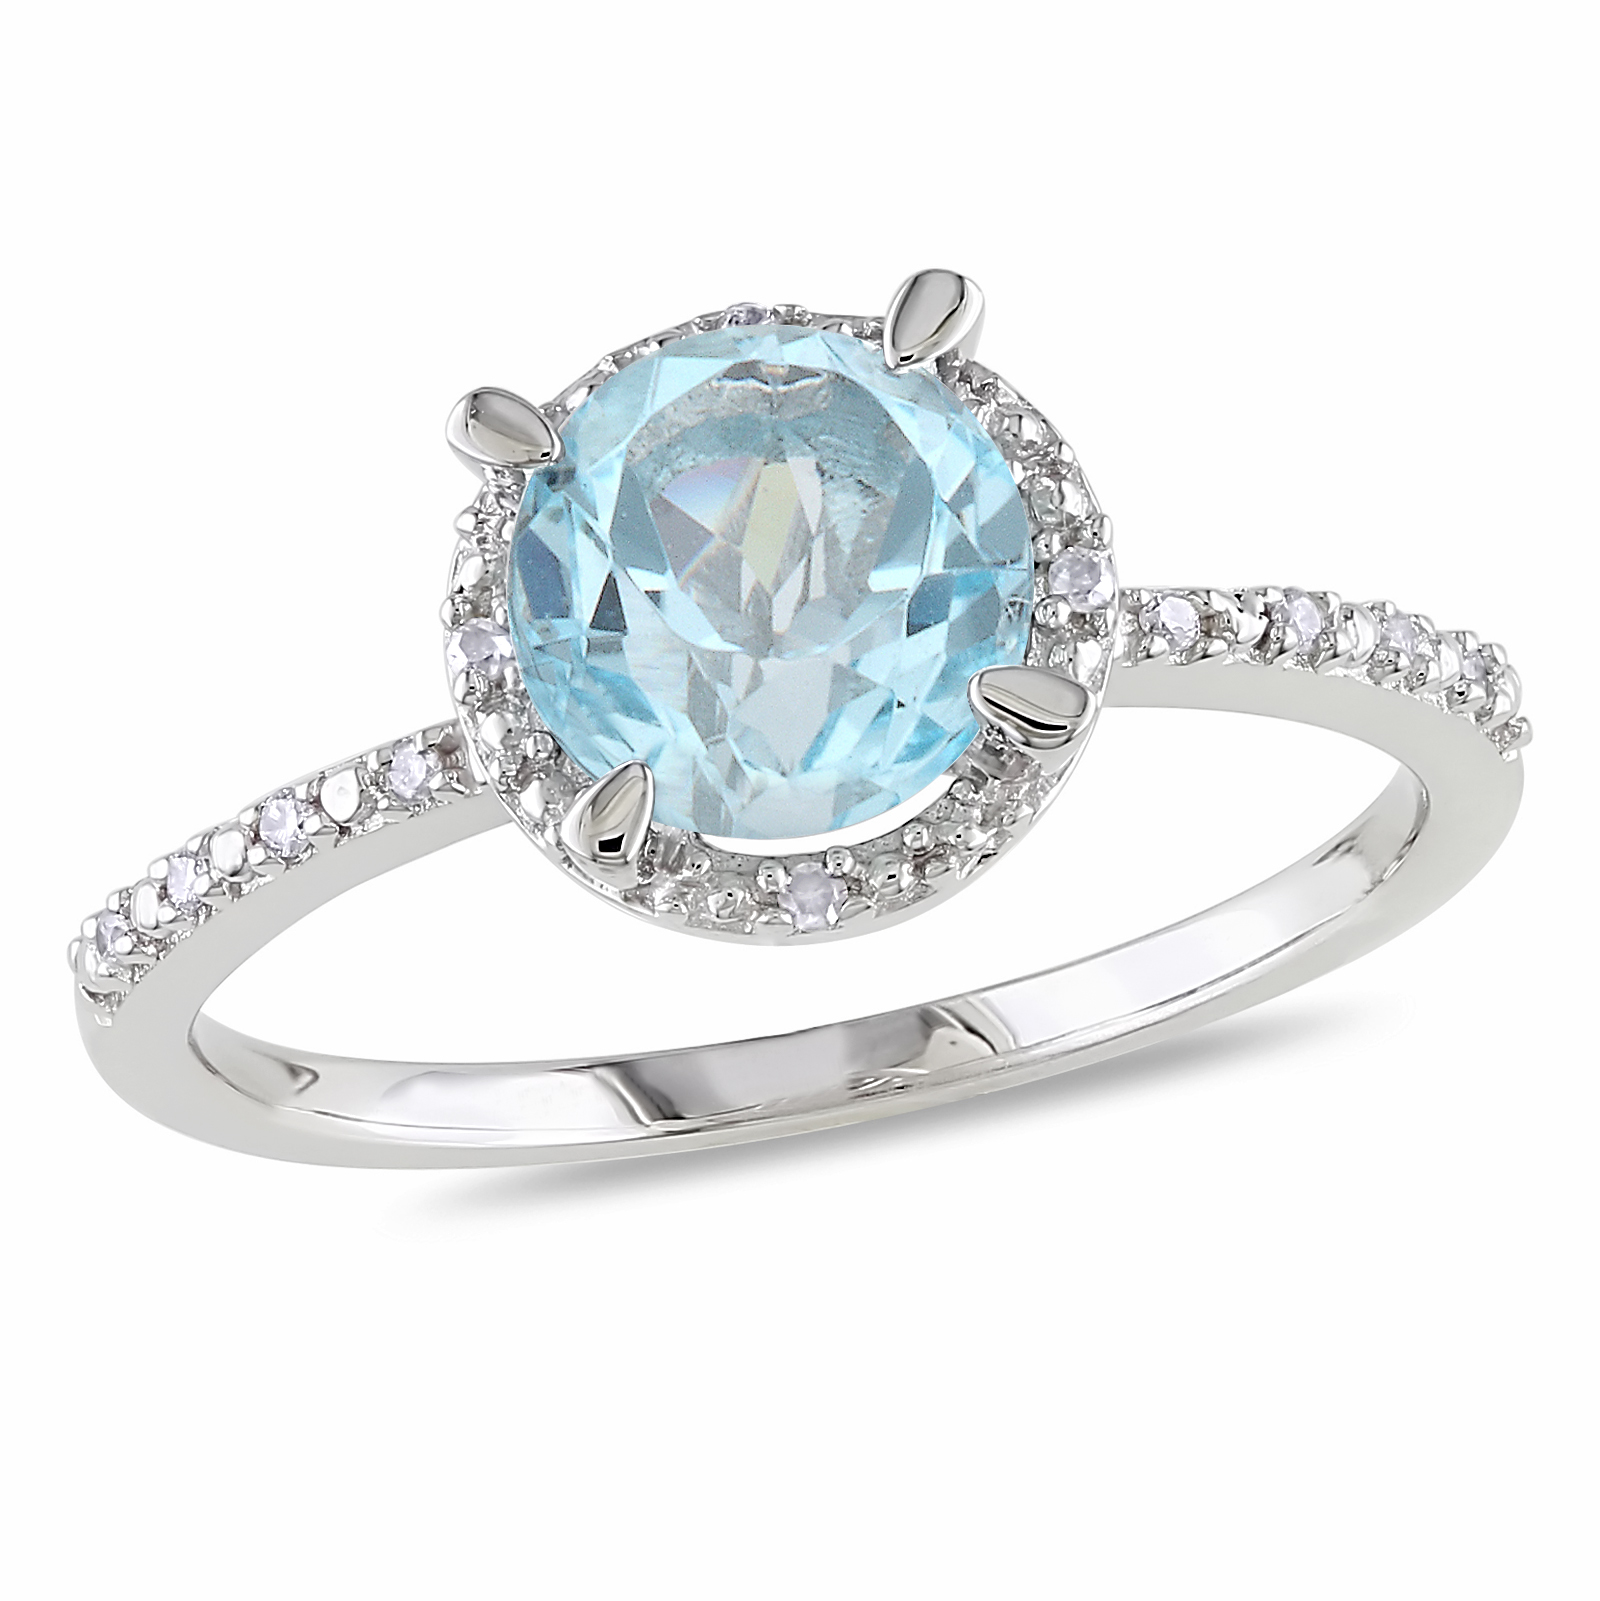 0.05 Carat T.W. Diamond and 1 1/2 Carat T.G.W. Blue Topaz Fashion Ring in Sterling Silver GH I3